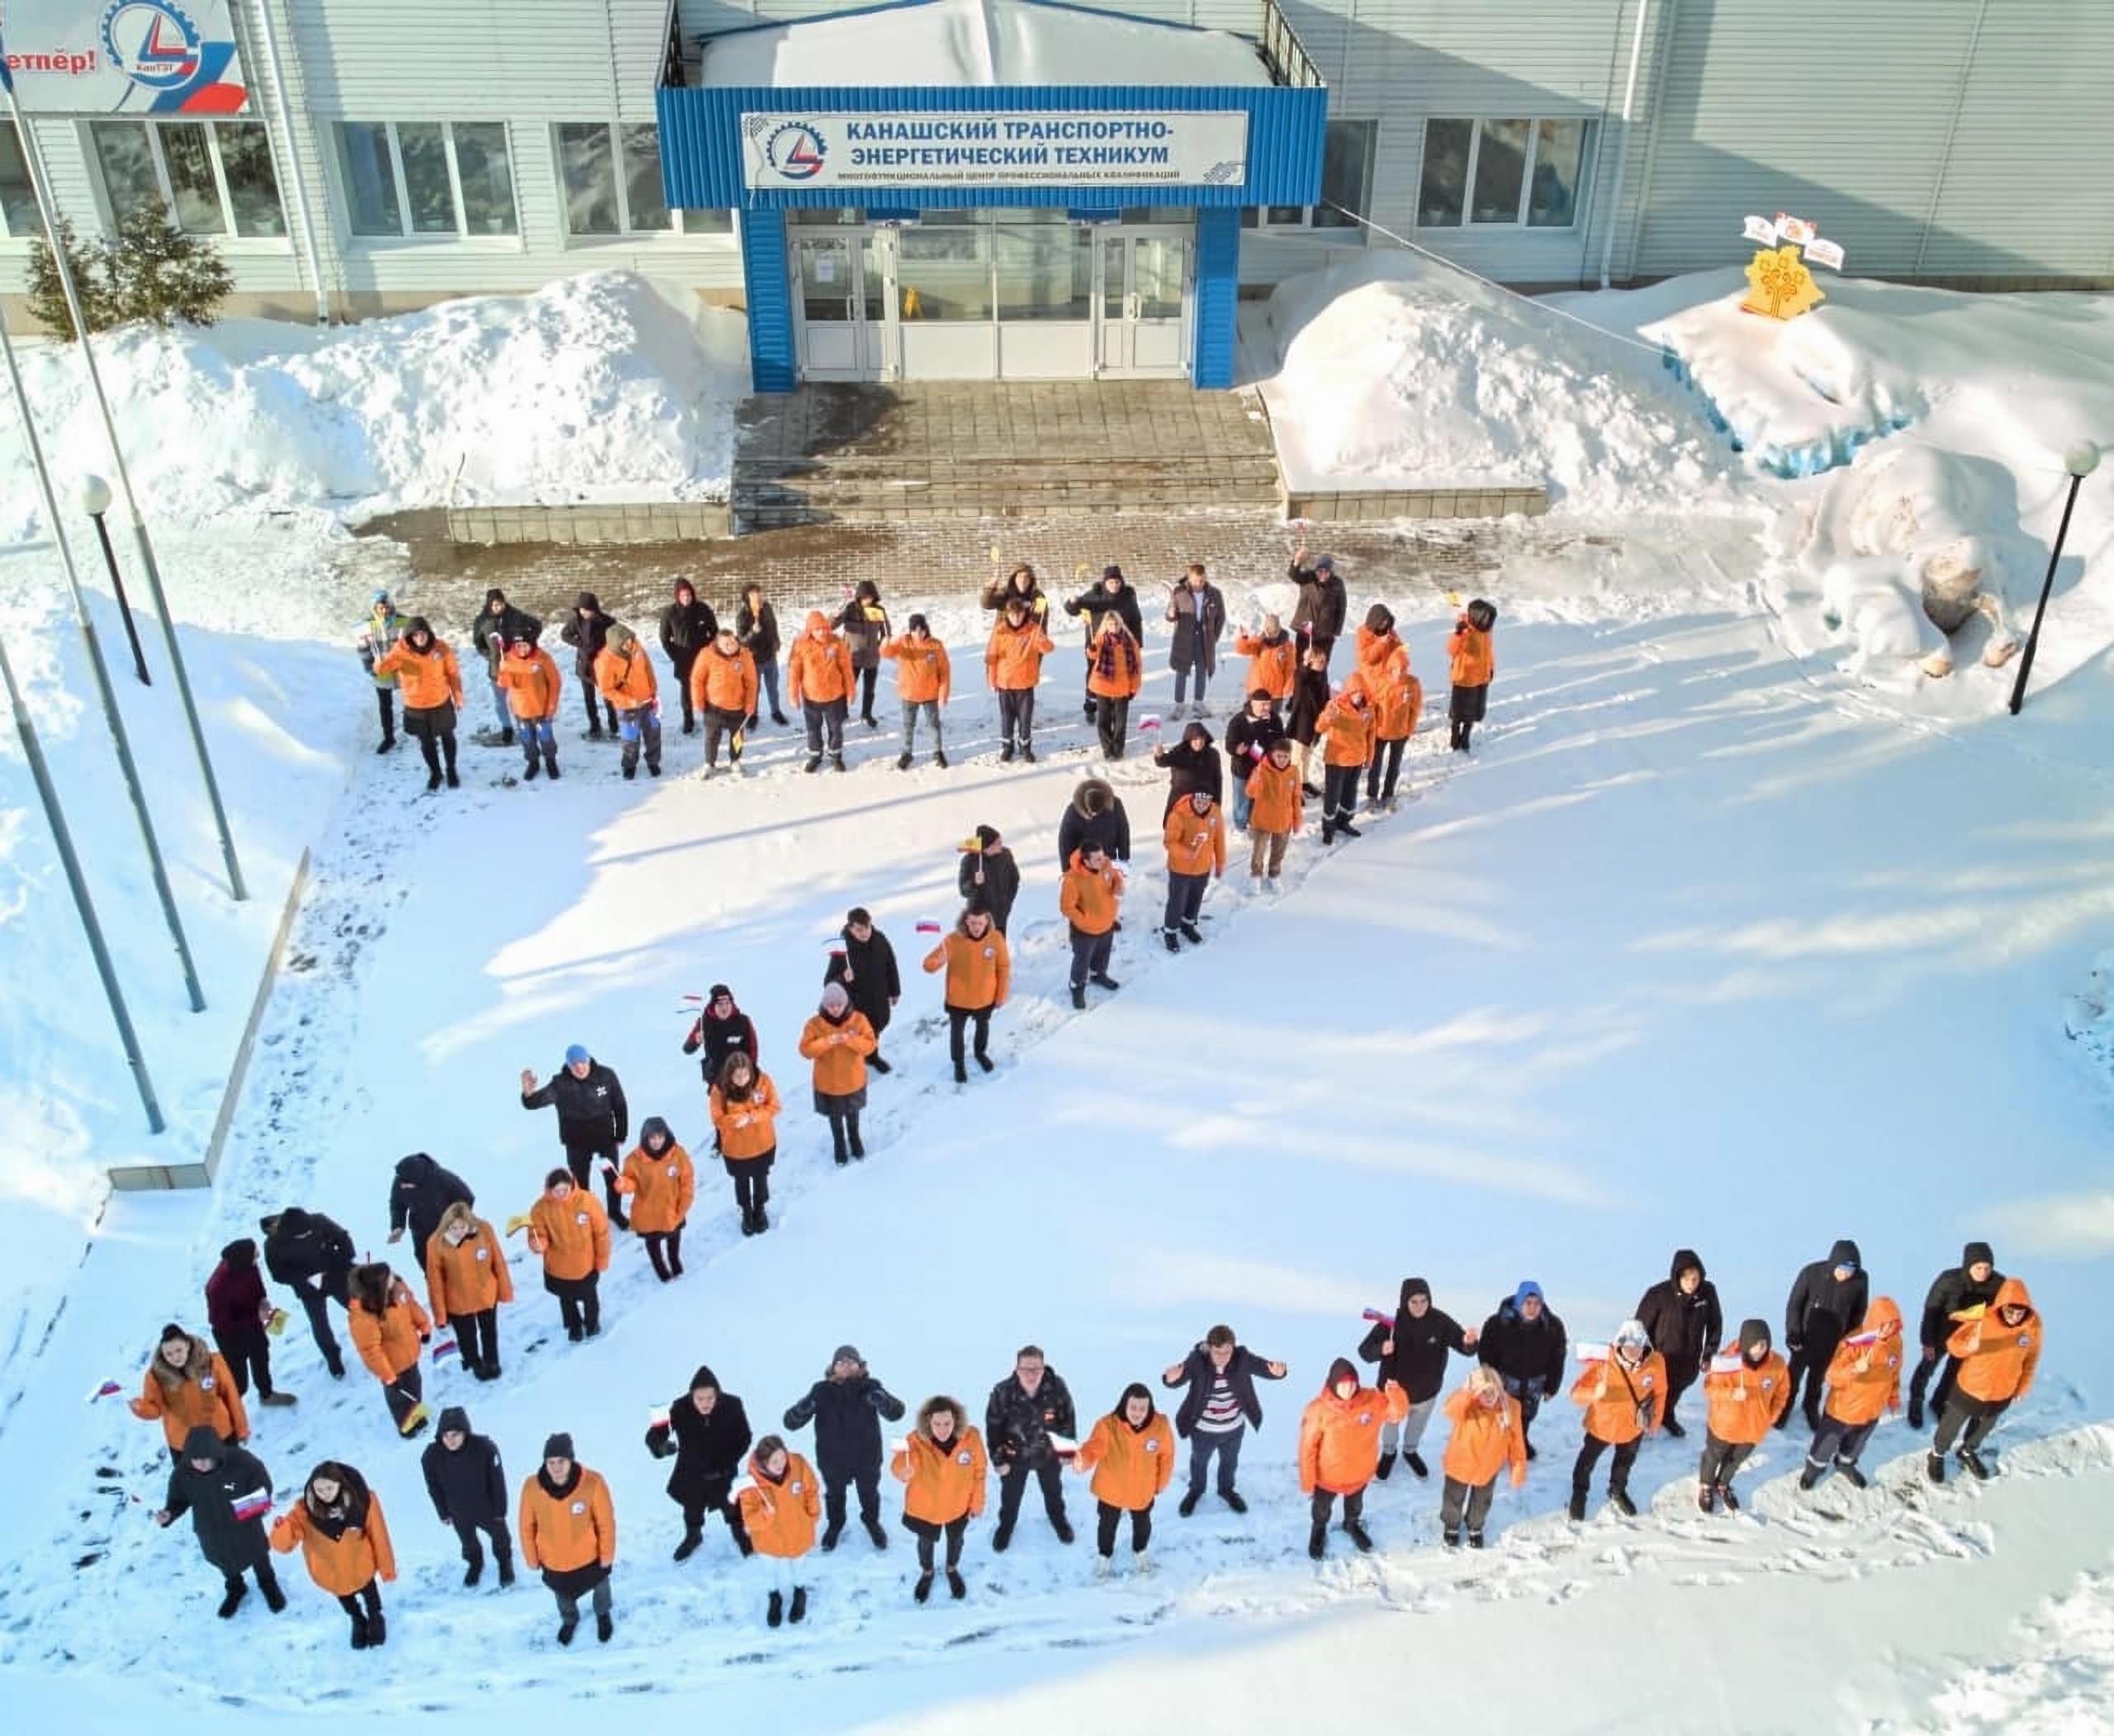 A snowy school frontyard pictured from above. A group of people wearing orange and black clothes stand in a formation in the shape of the letter Z, and wave Russian flags. 